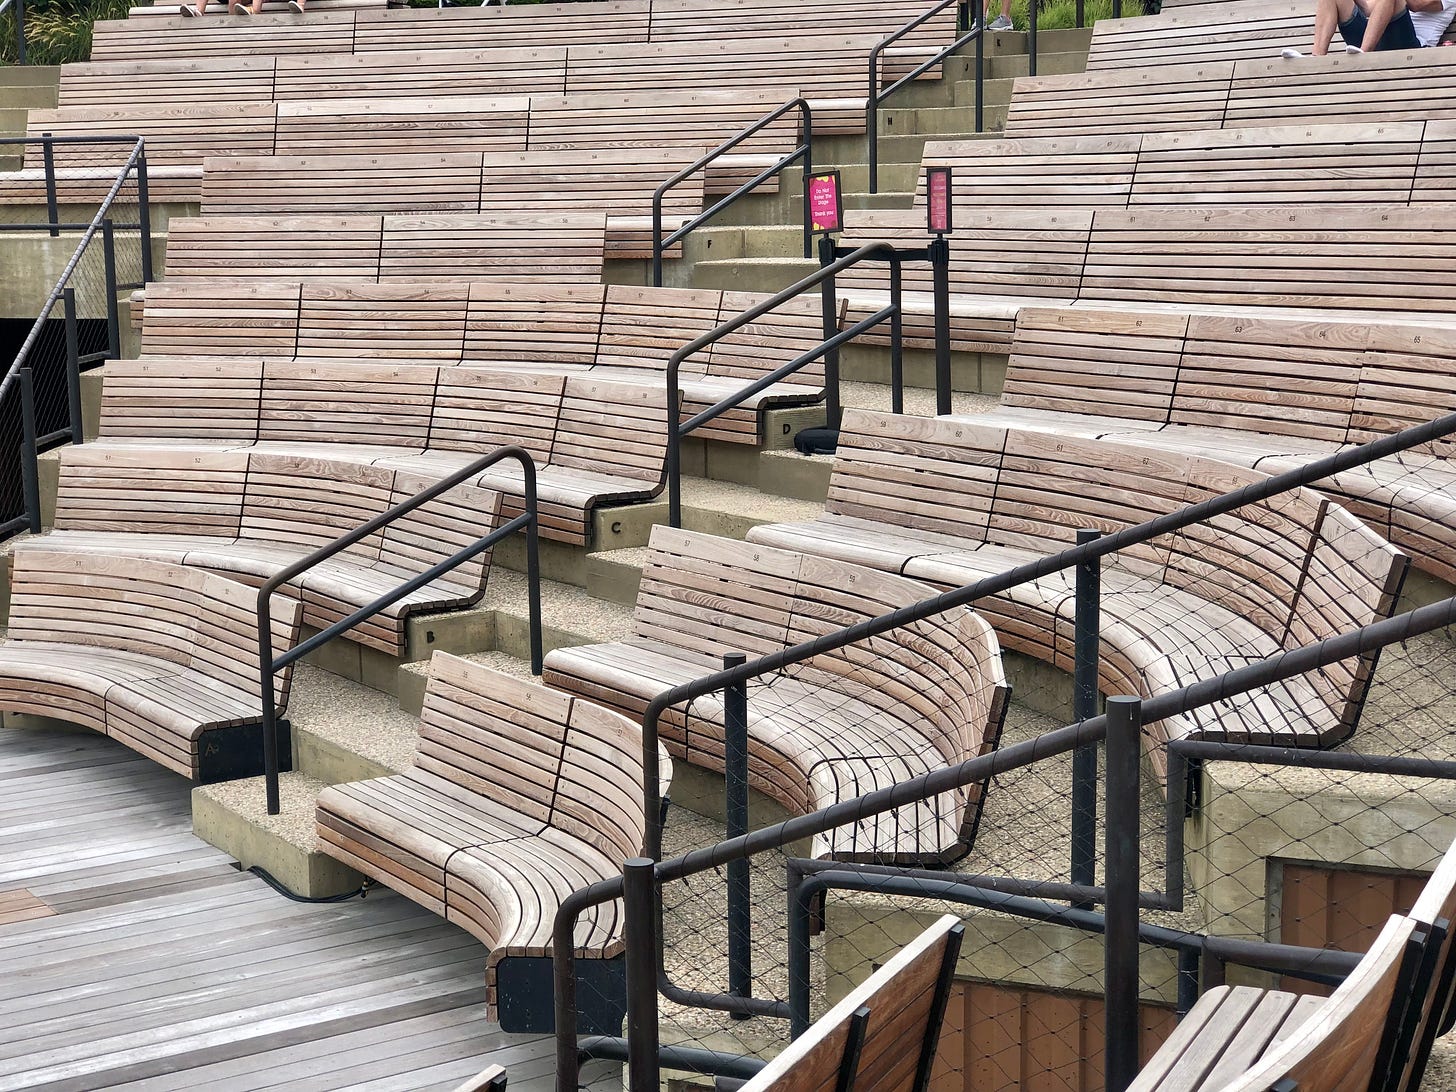 An amphitheater, curved seats of pale wooden slats, black metal handrails dividing sections of the seating.